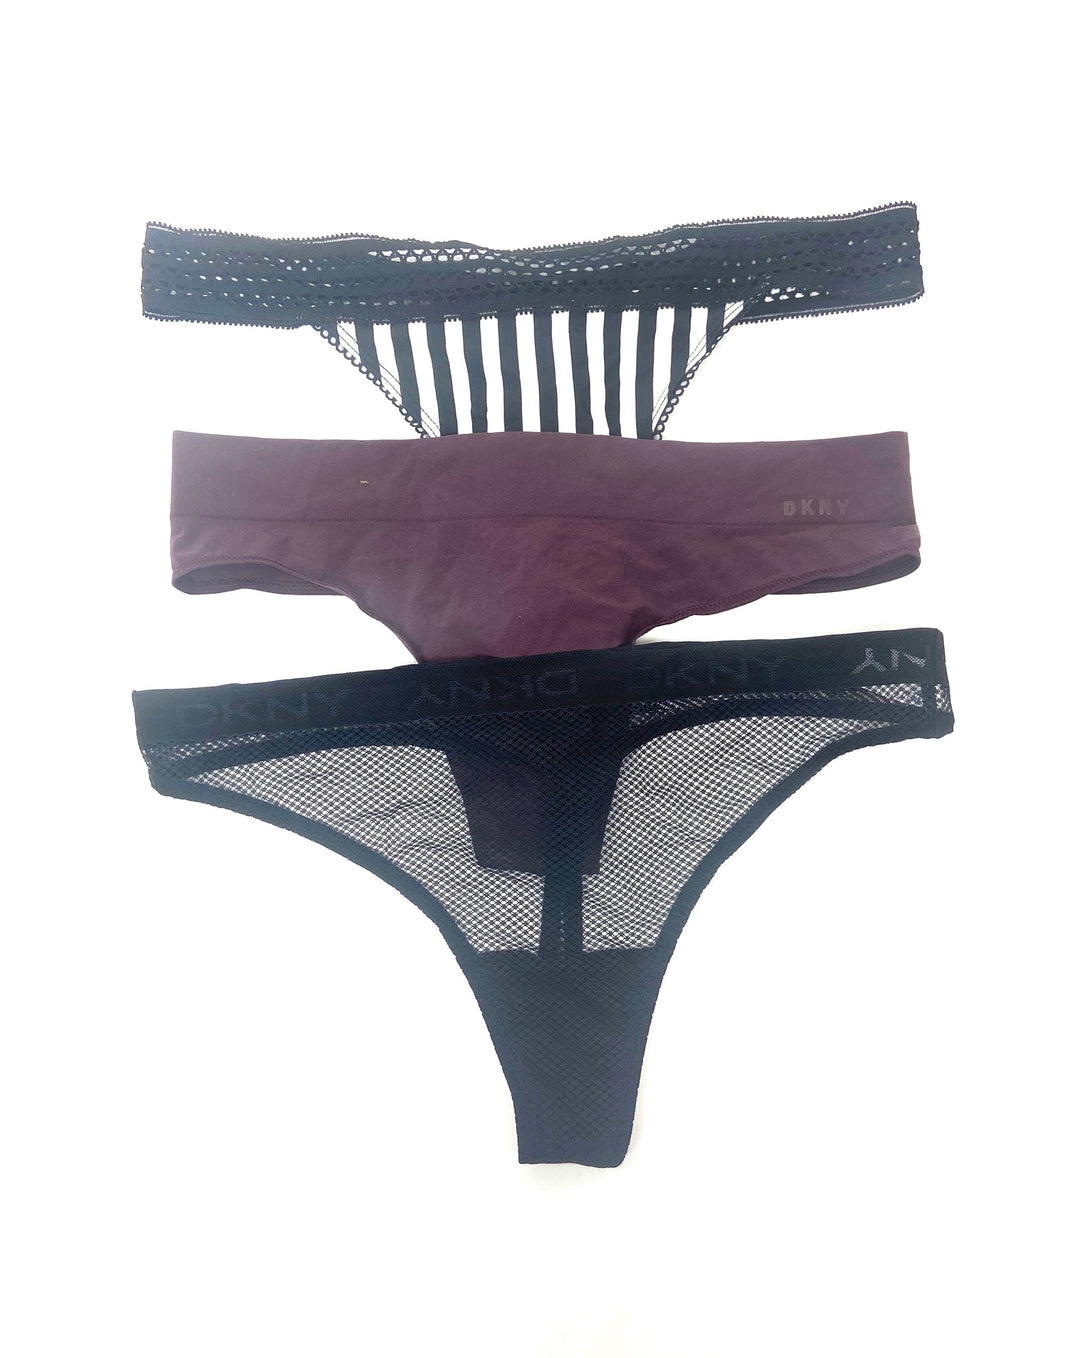 DKNY Thong Underwear Mystery Pack of 3 - Small